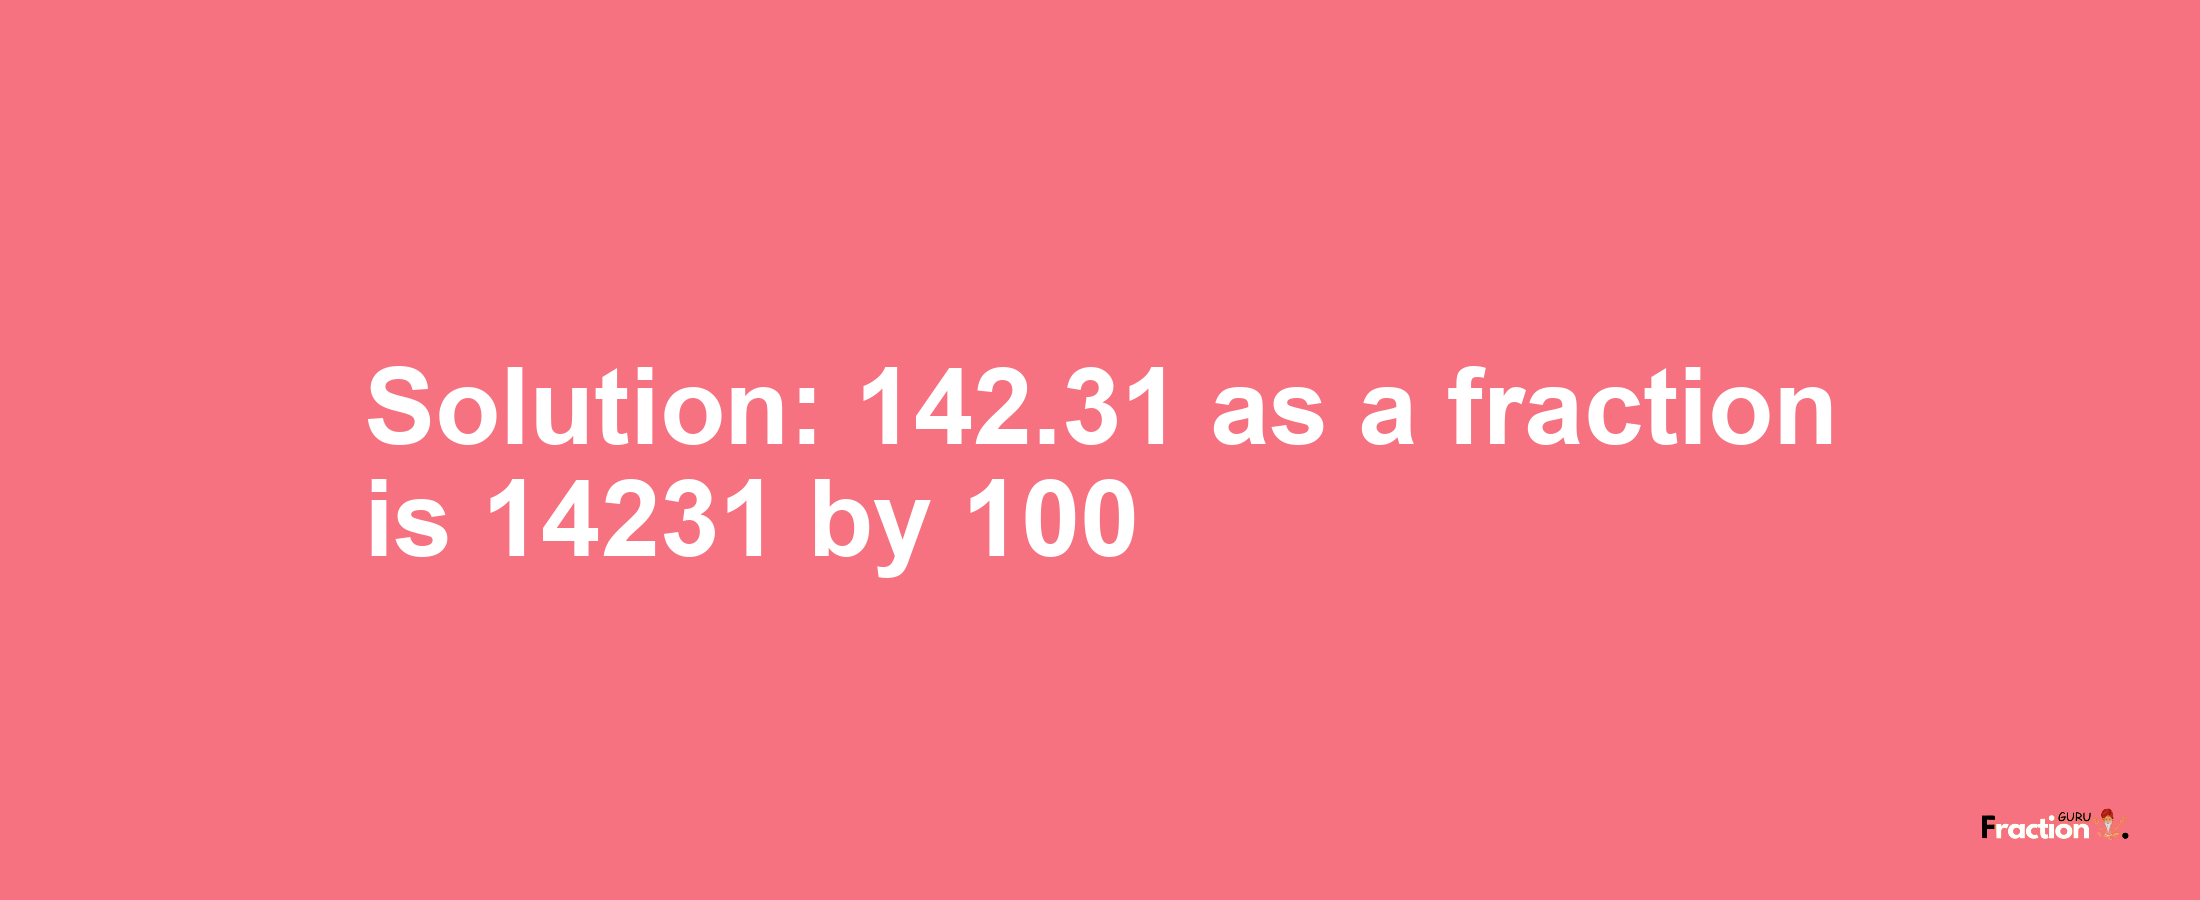 Solution:142.31 as a fraction is 14231/100